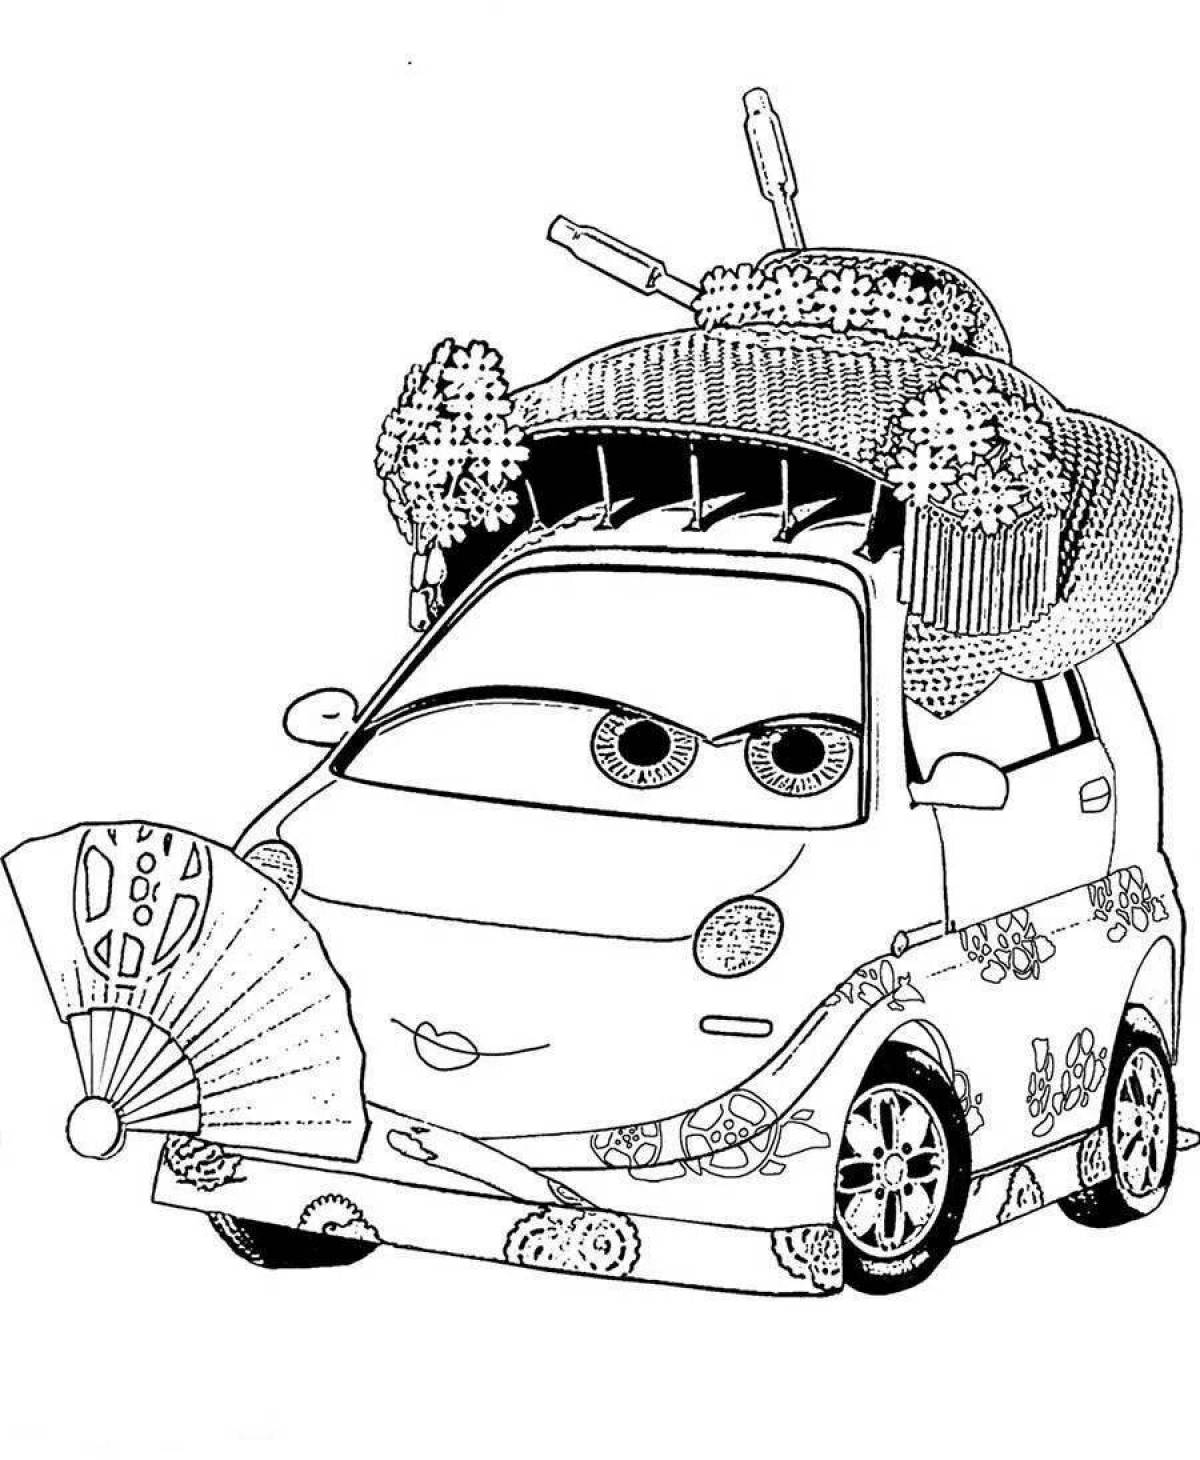 Dazzling supercar coloring page